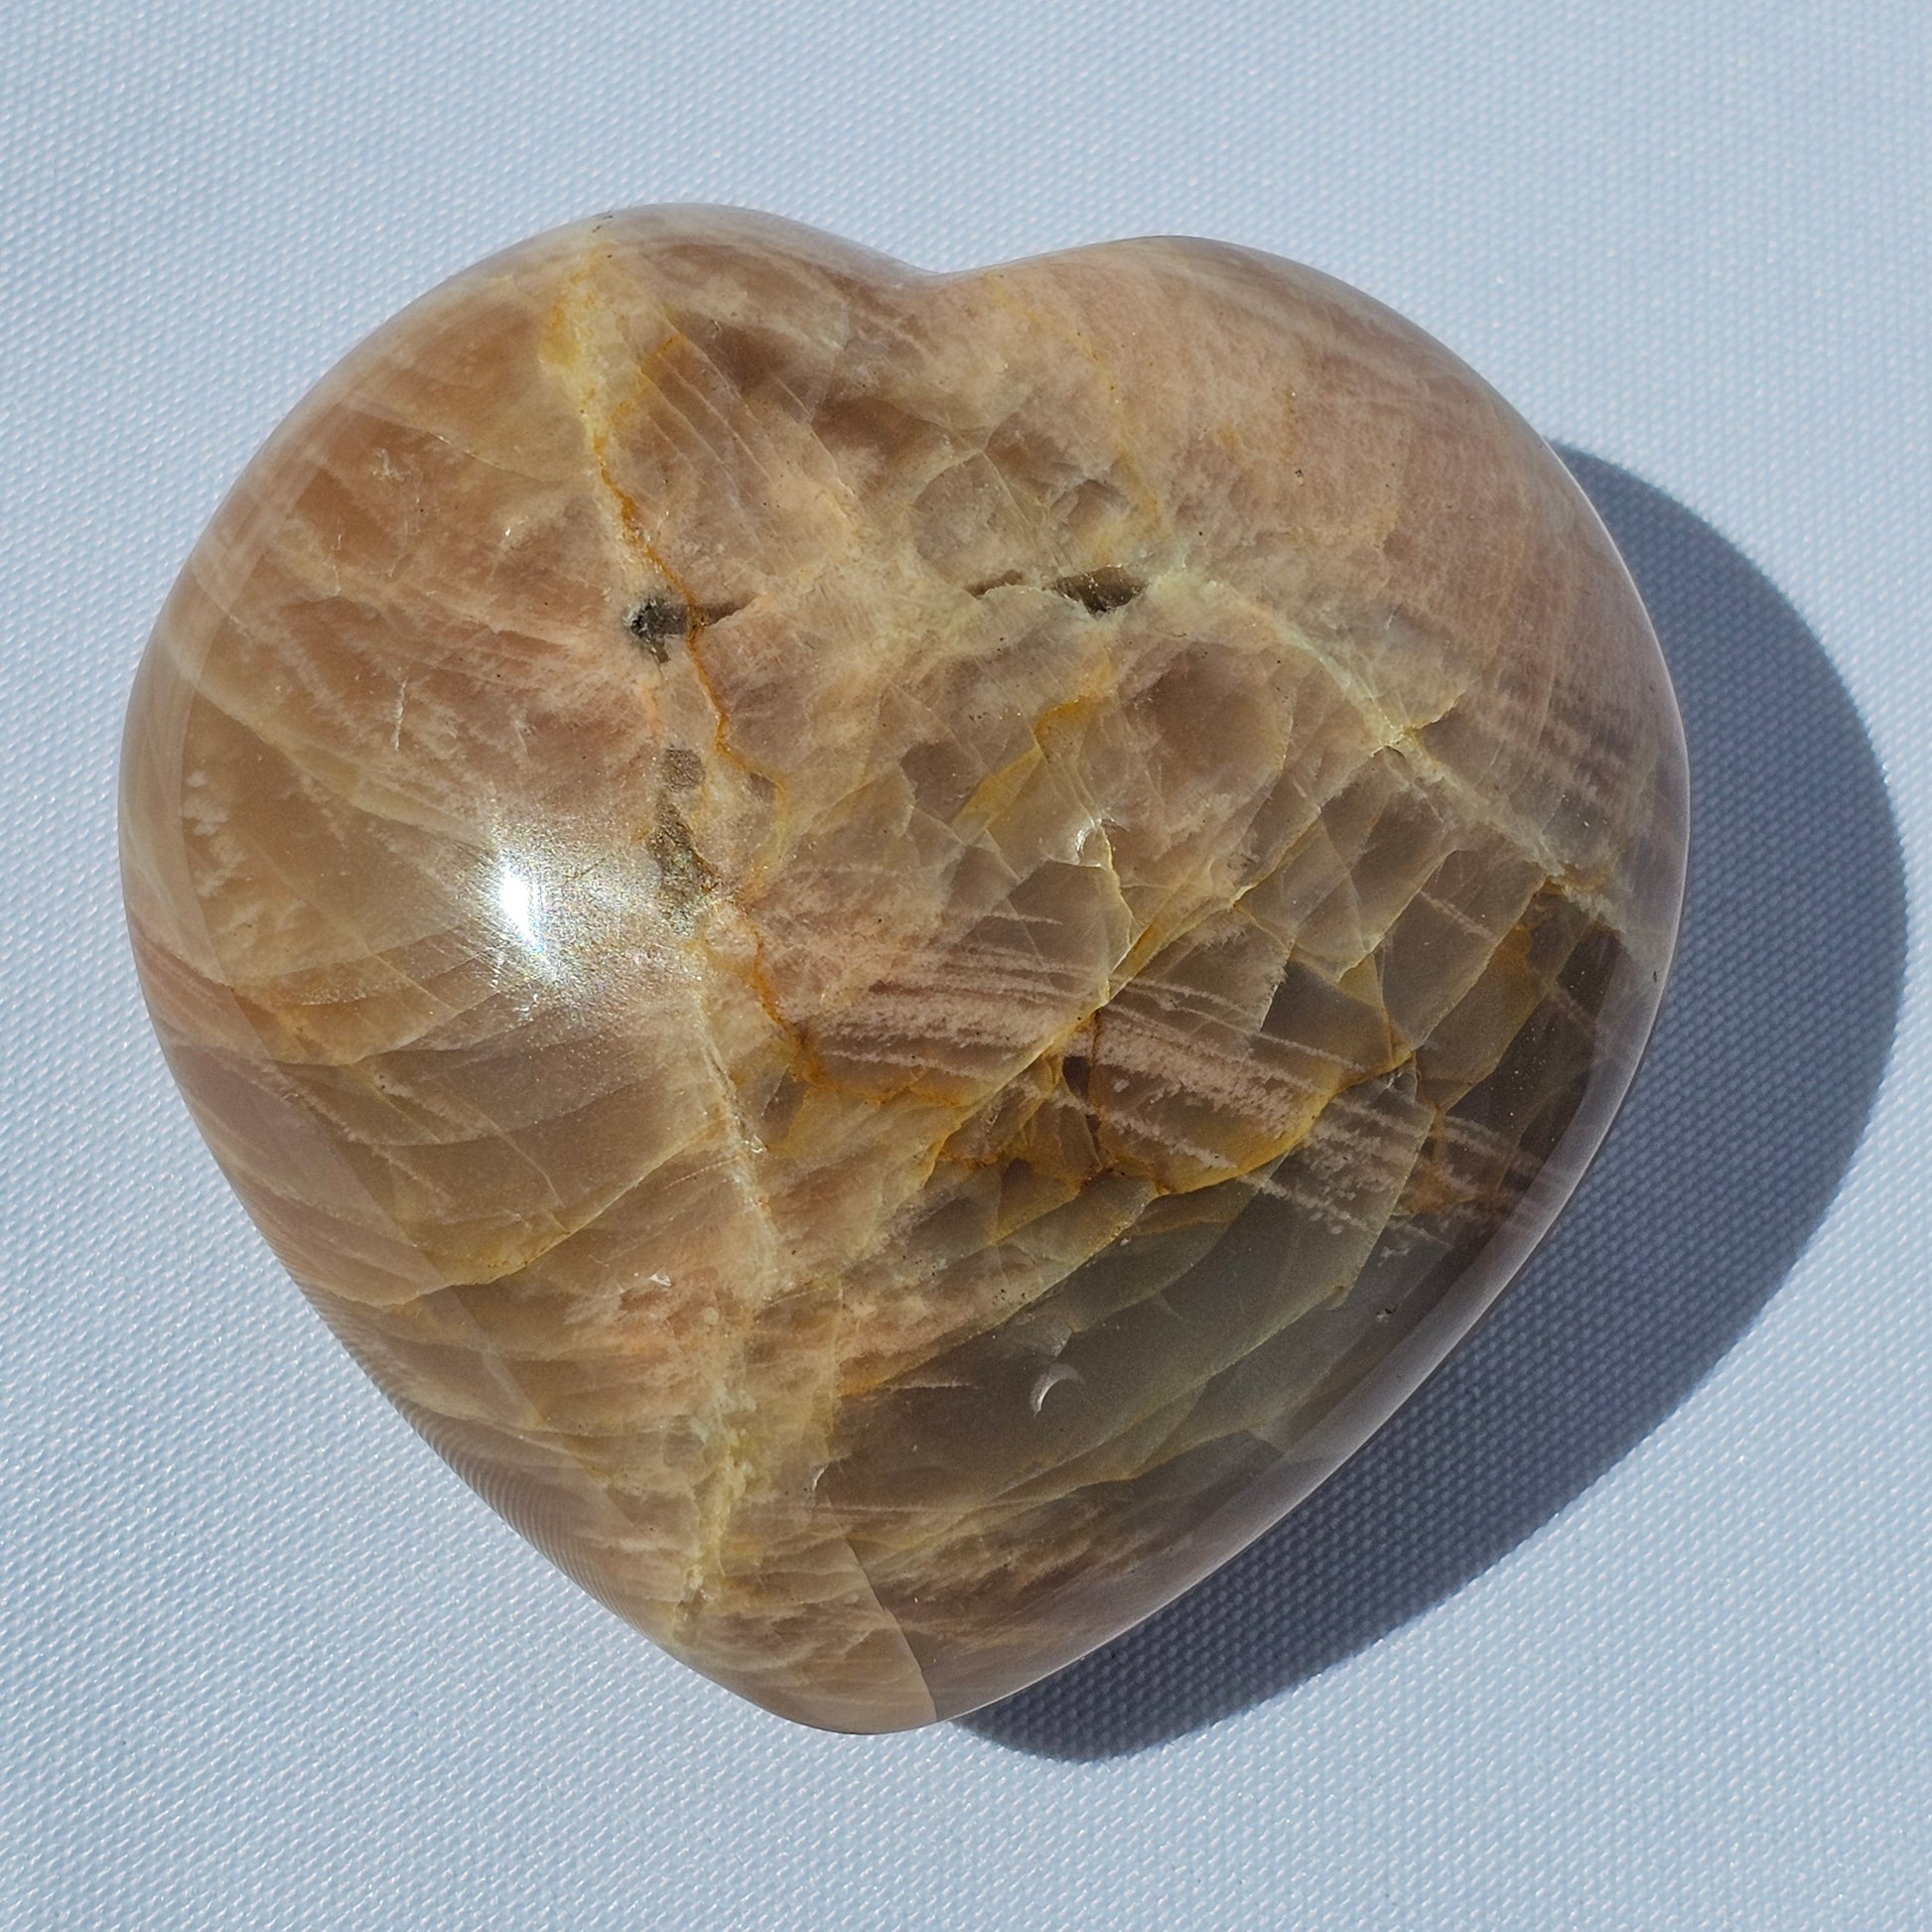 Large High quality, silver flash Peach Moonstone and Sunstone heart carving | Valentine's Day Gift for Girlfriend